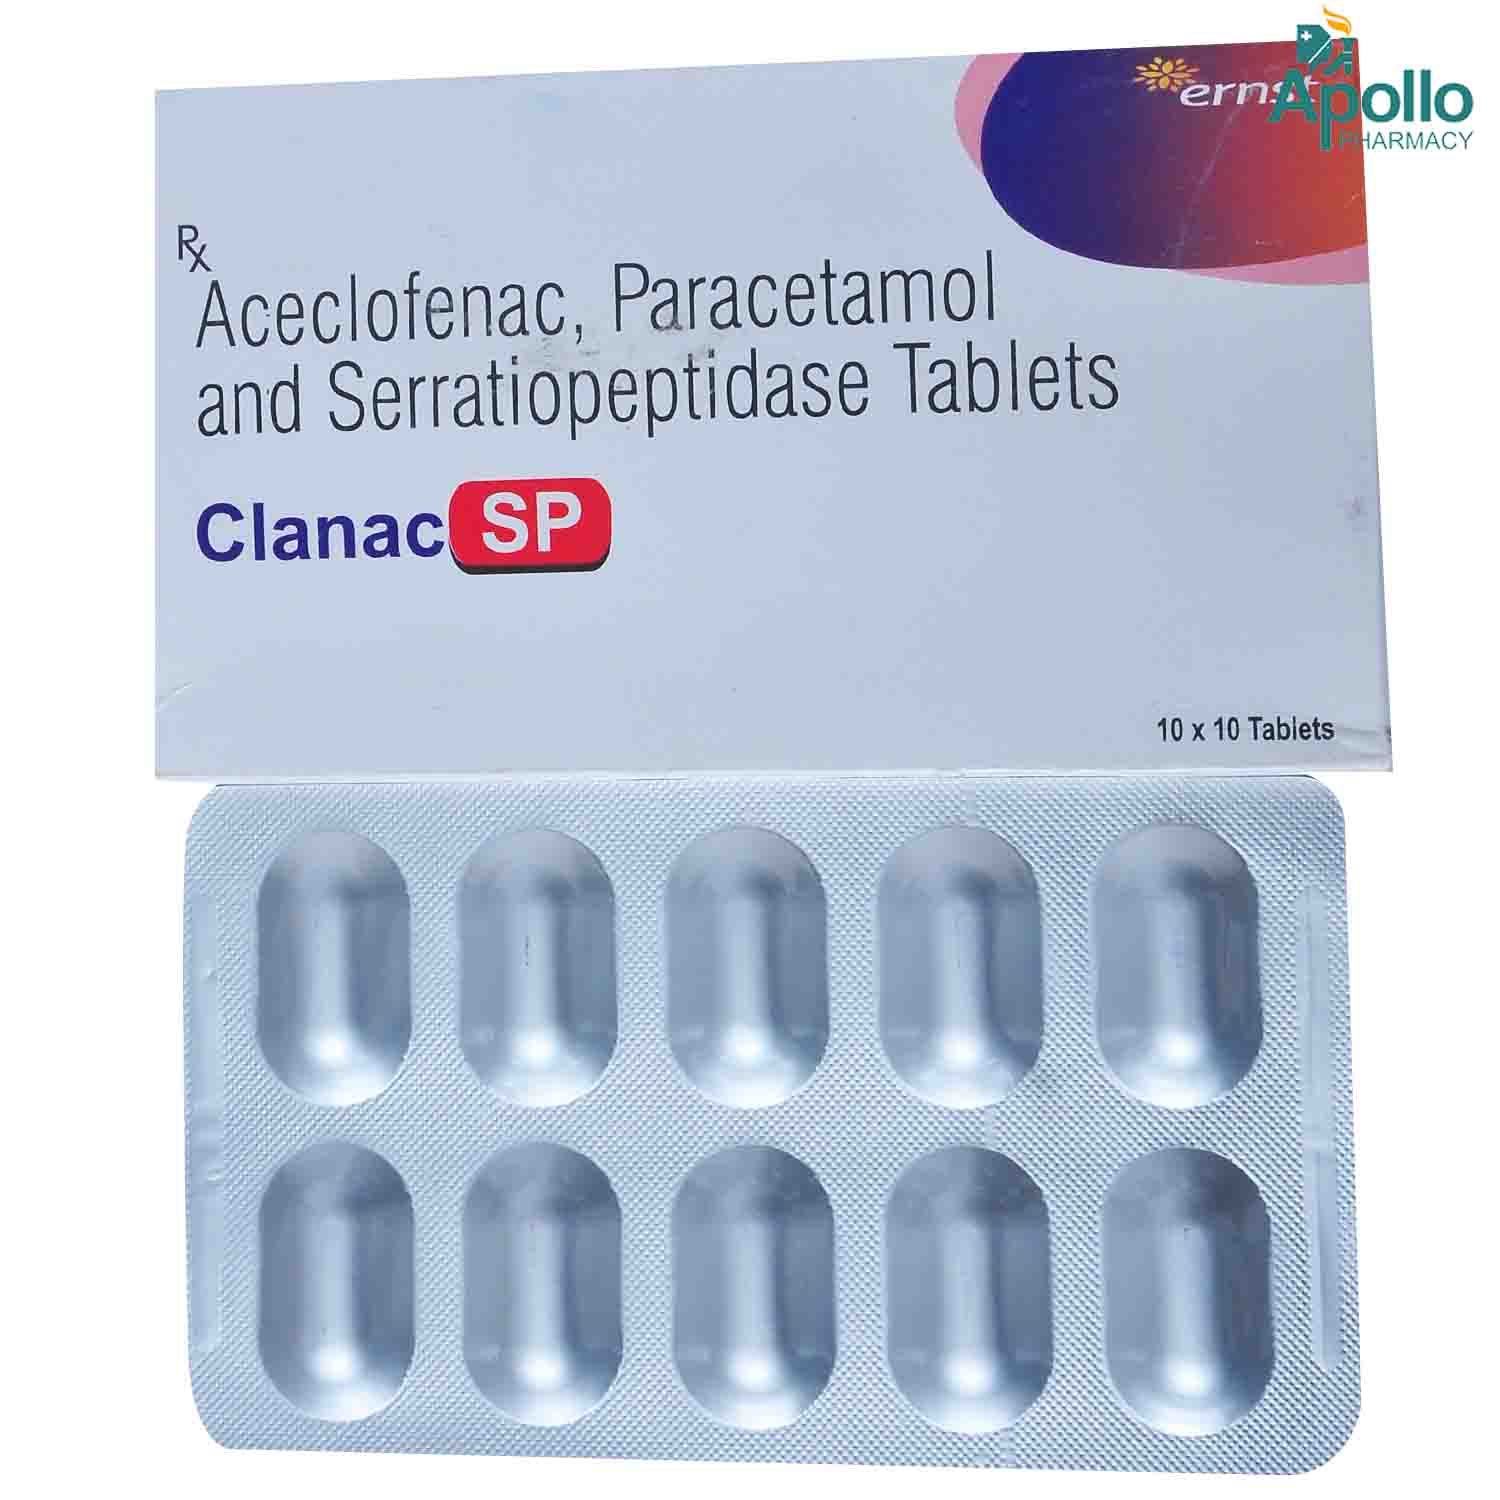 Clanac Sp Tablet 10s Price Uses Side Effects Composition Apollo Pharmacy